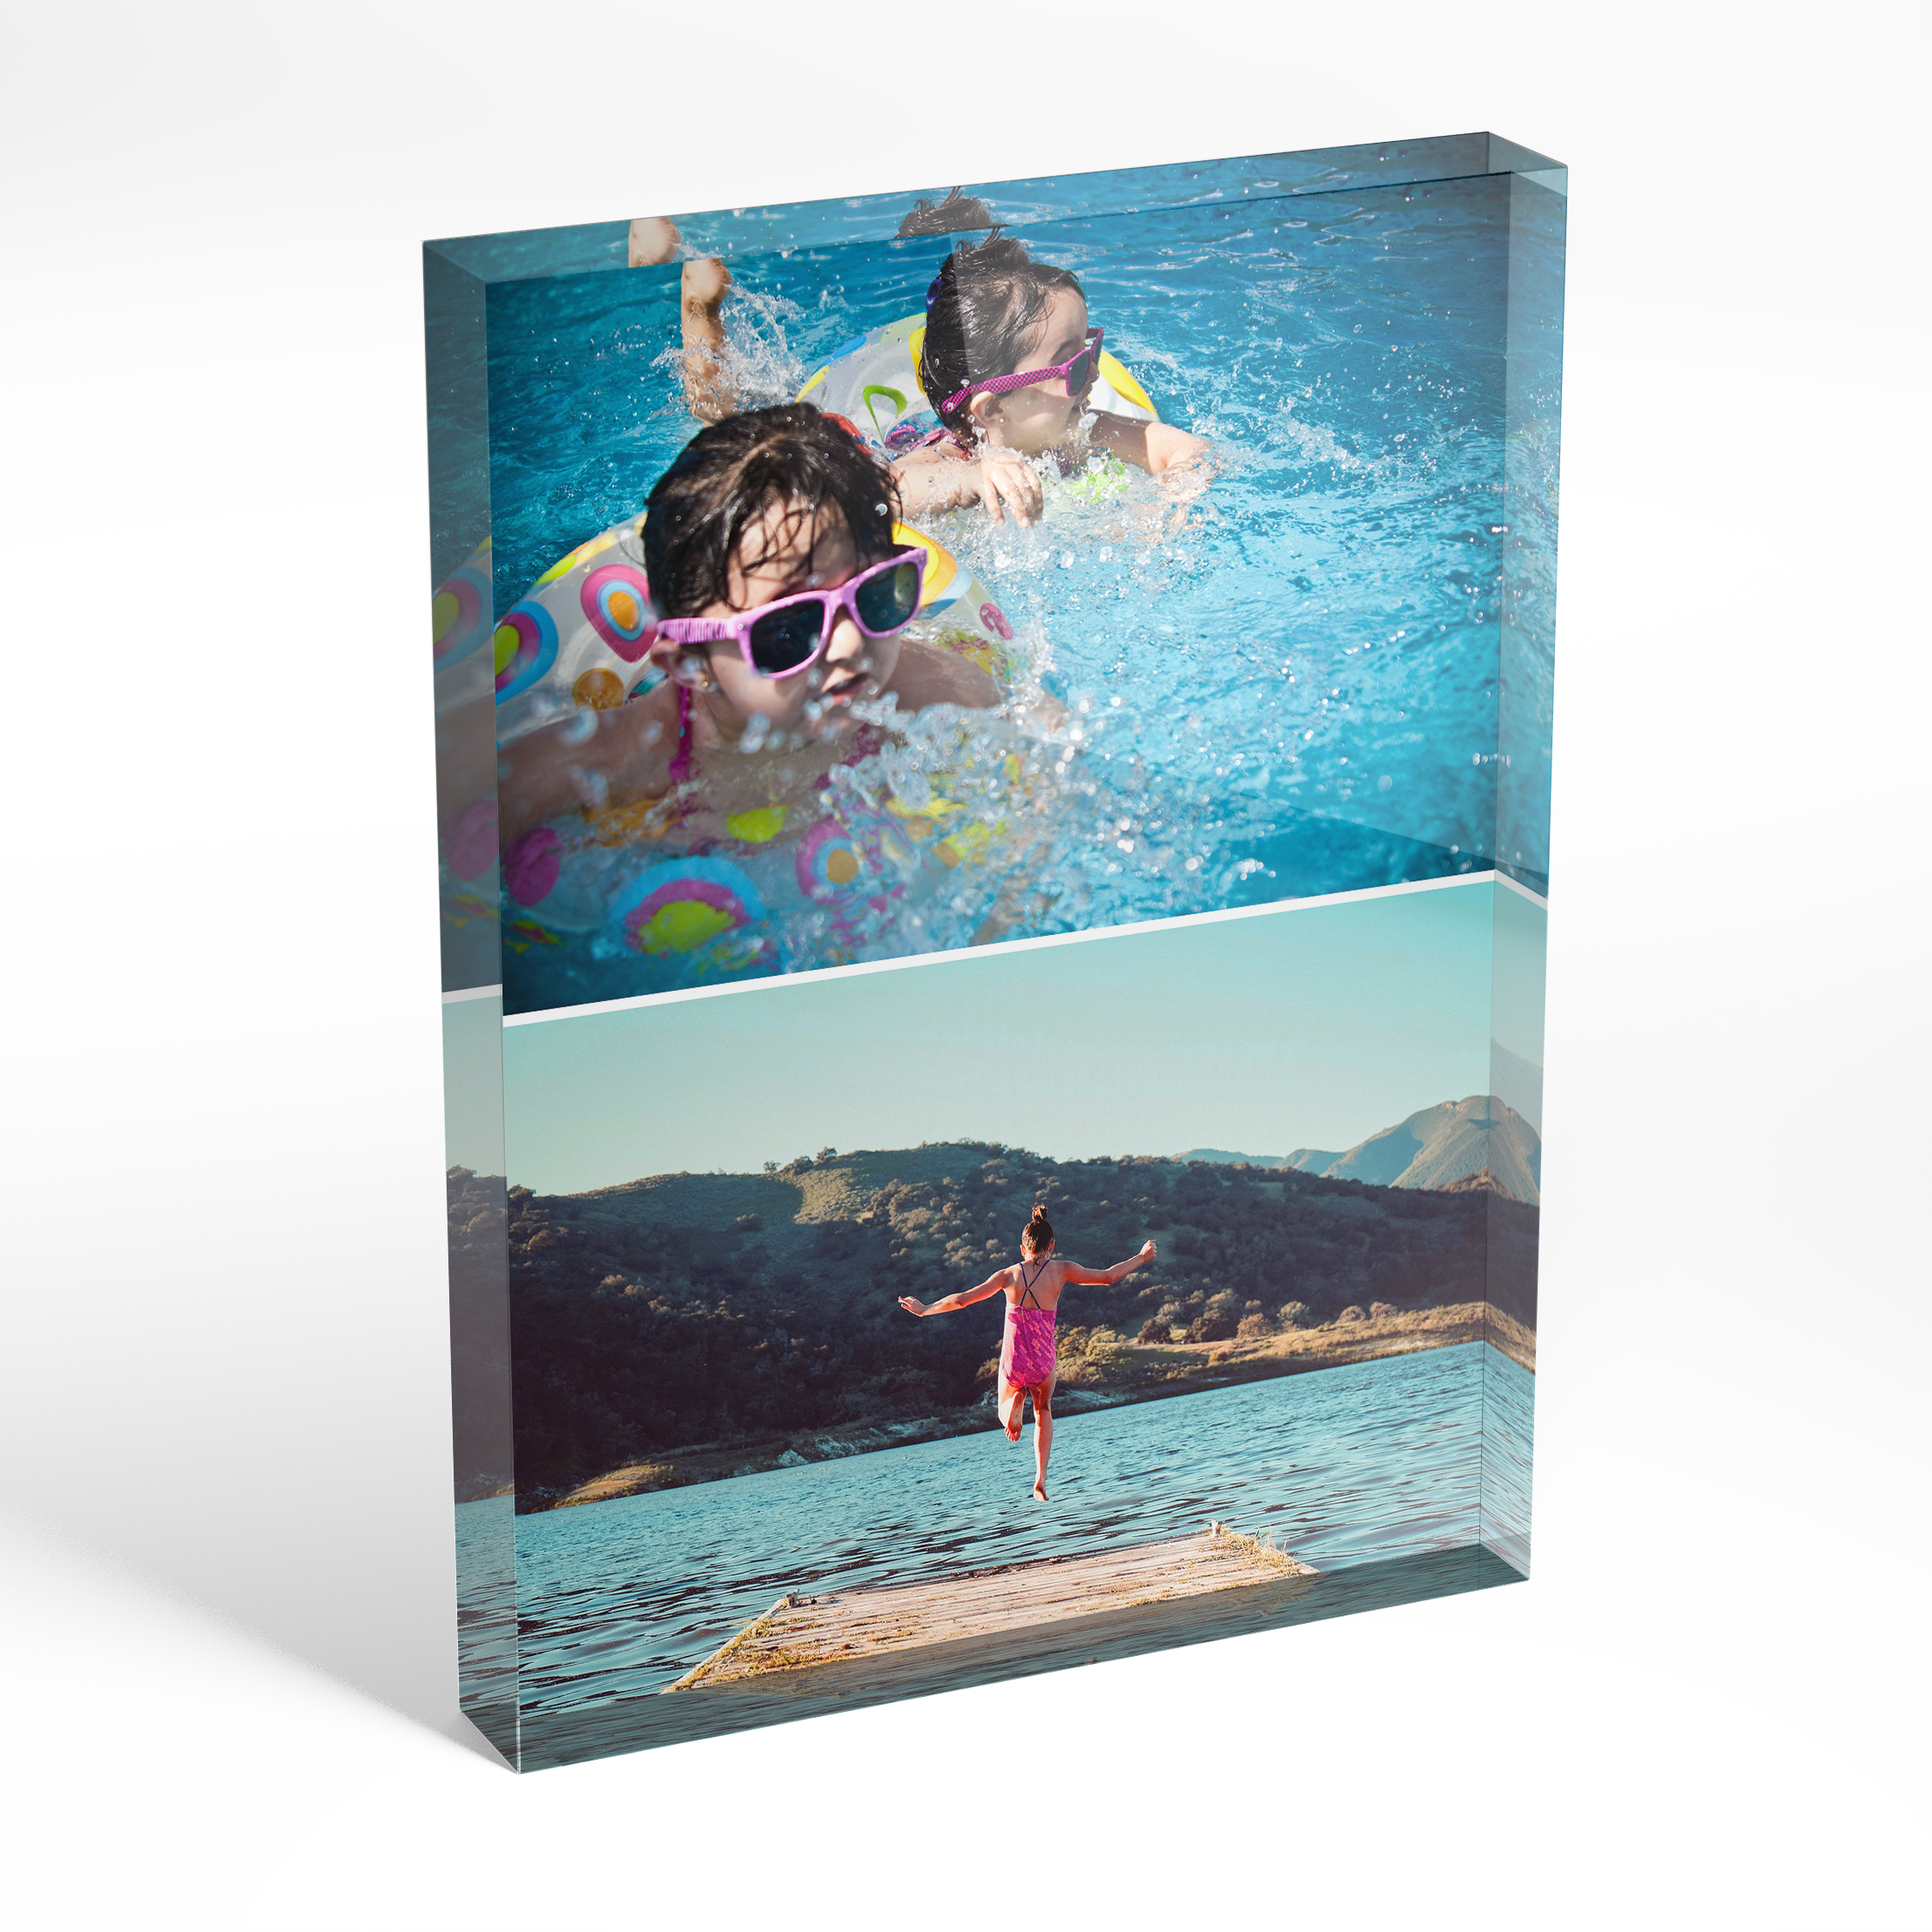 An angled side view of a portrait layout Acrylic Photo Gift with space for 2 photos. Thiis design is named "Stacked". 